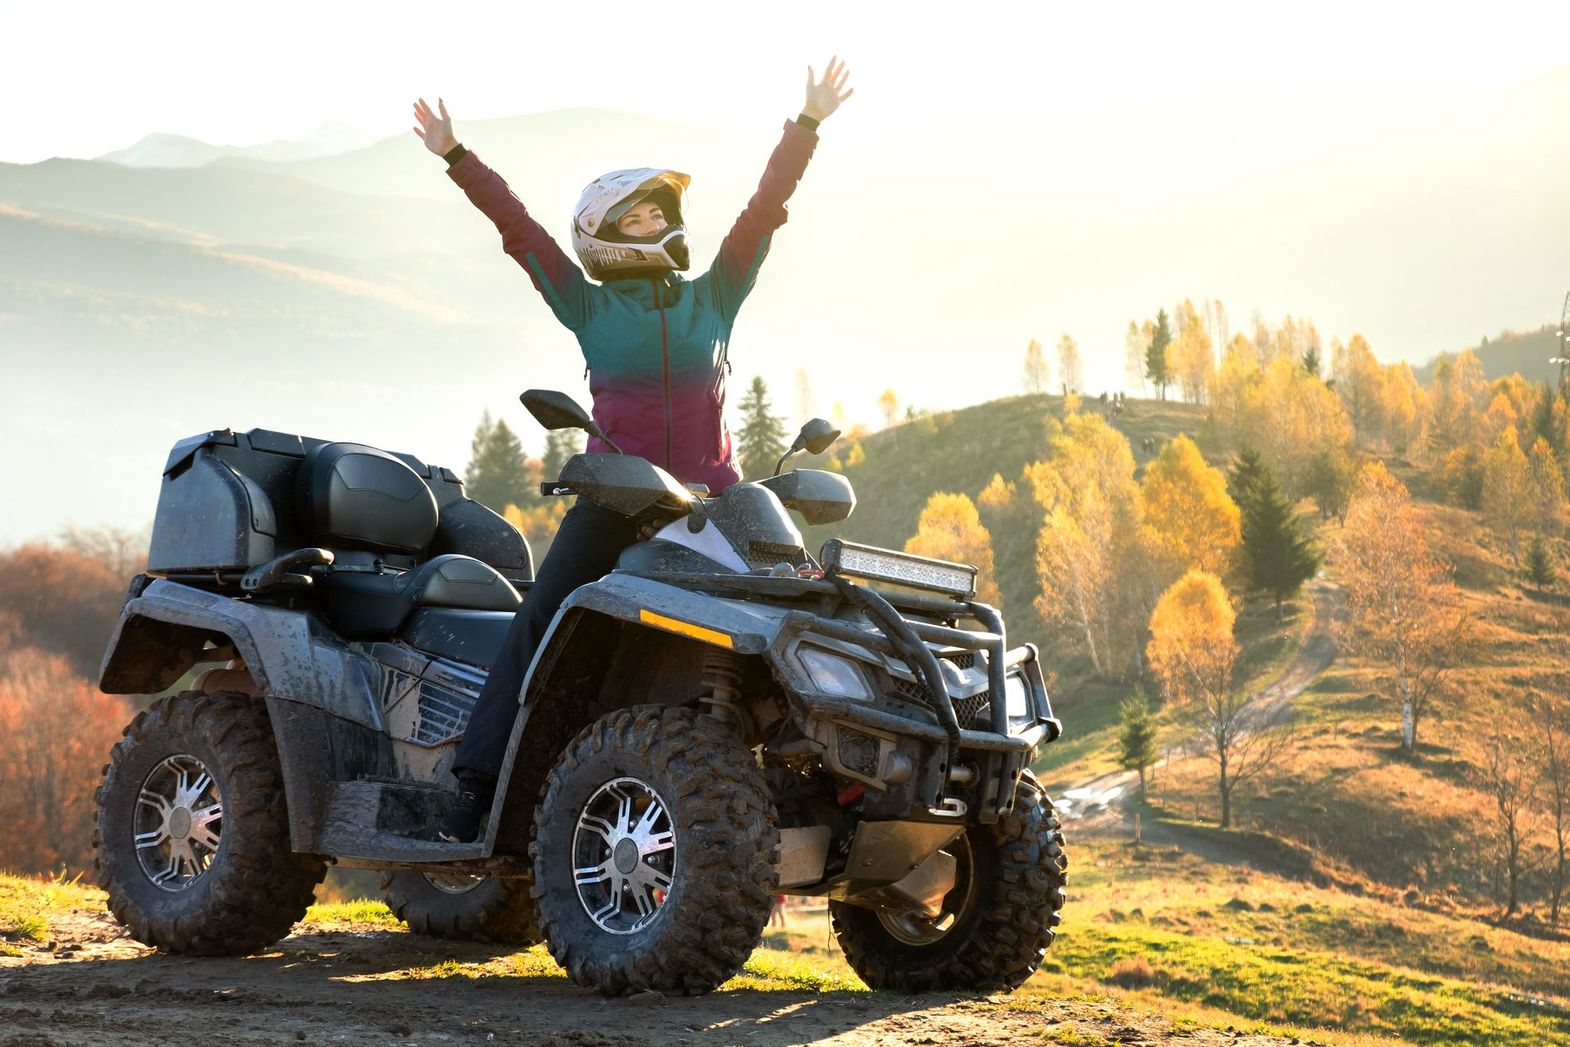 A woman is riding an atv in the mountains with her arms in the air.